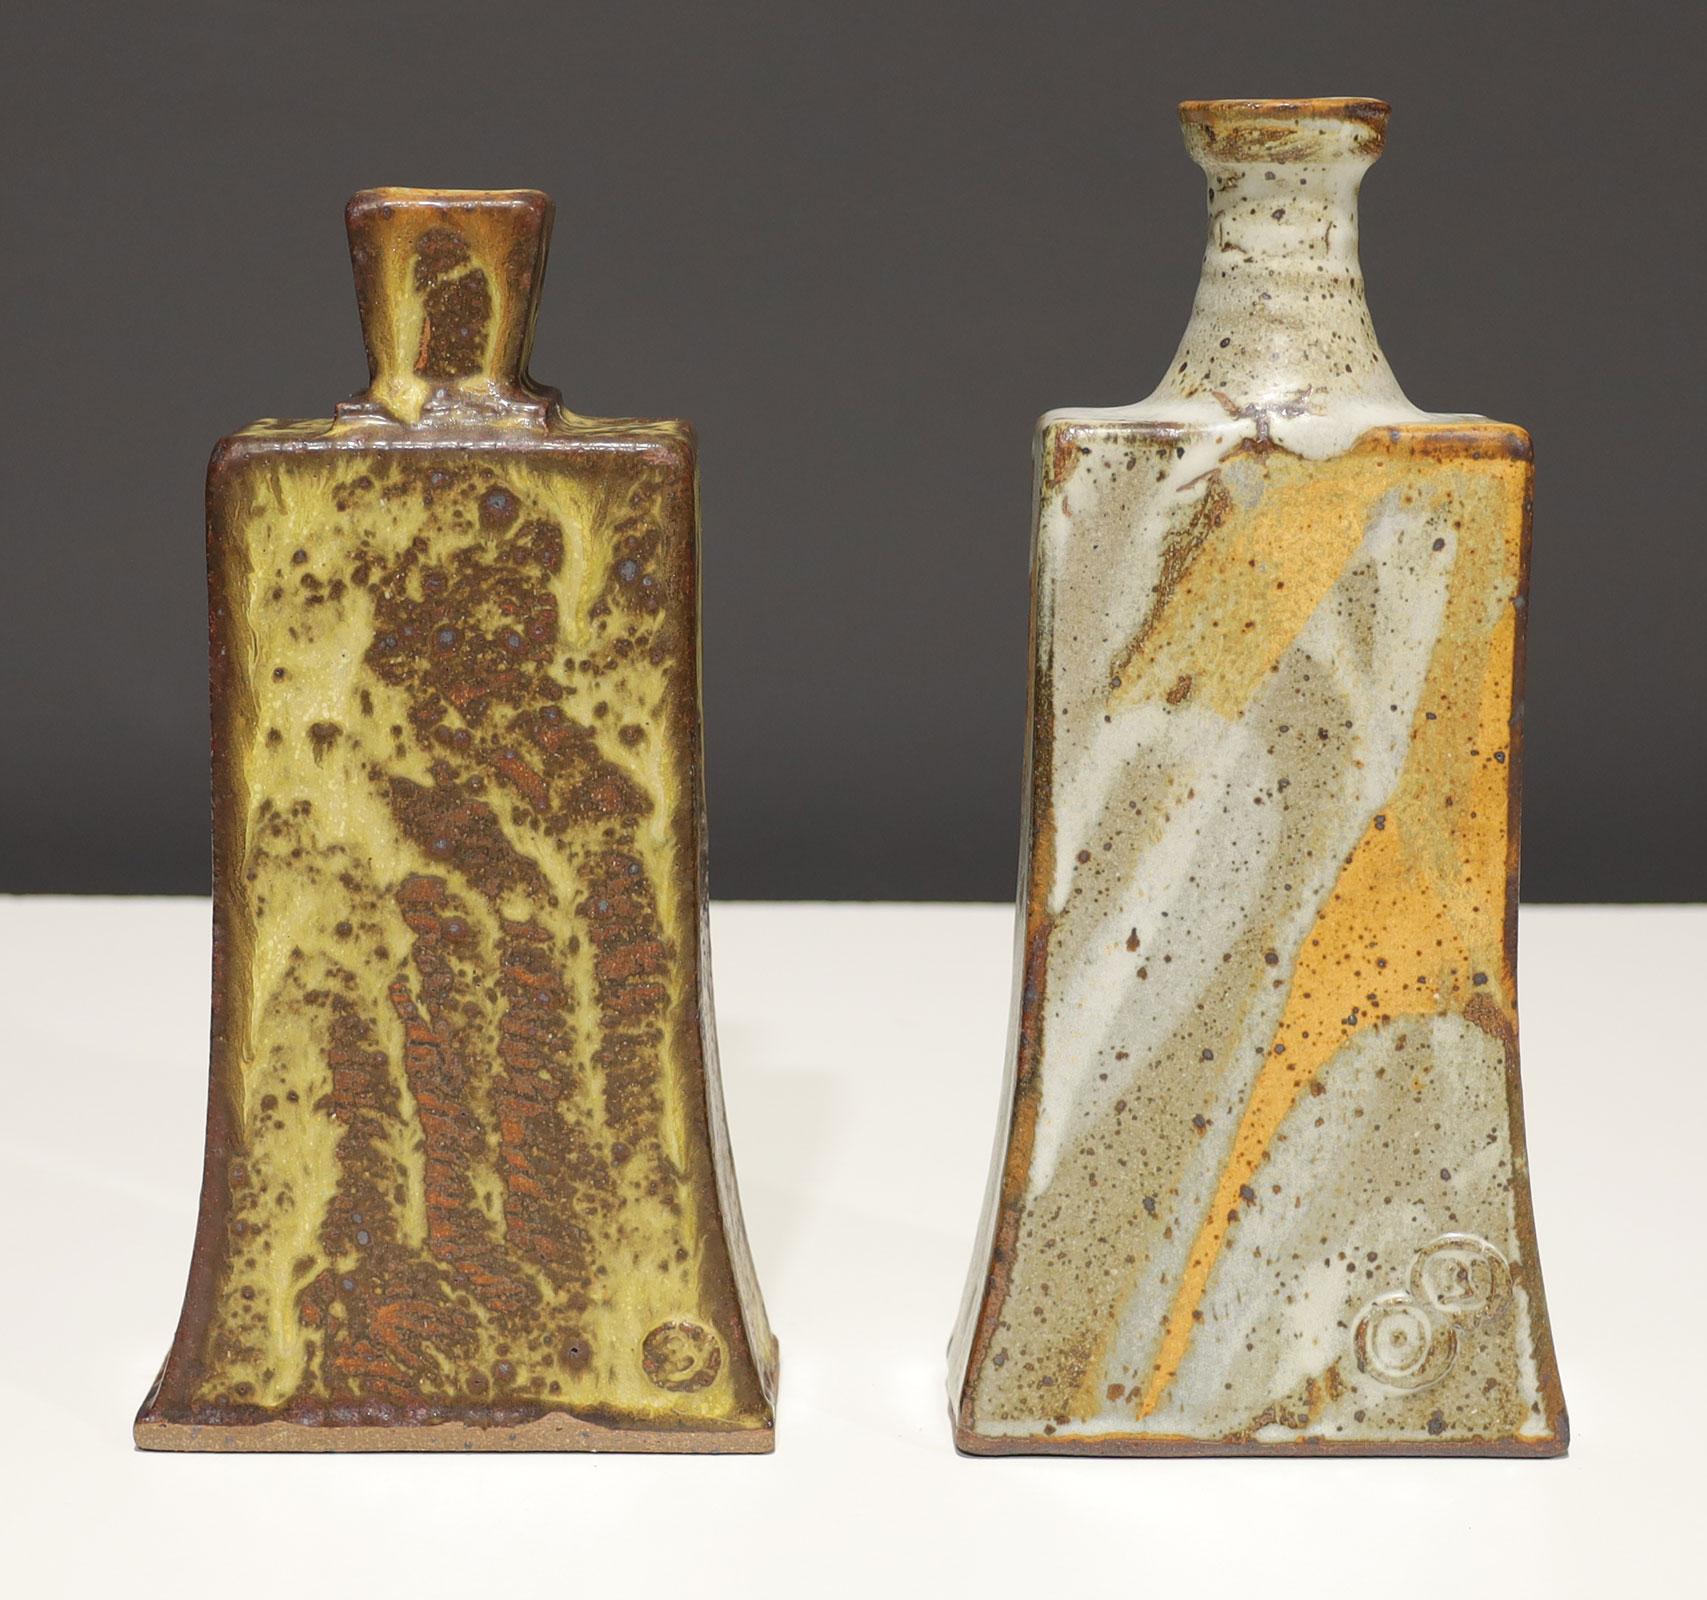 A beautifully executed pair of organic modern vases which are both stamped with makers mark. Browns, grays, whites and saffron colors illuminate these vases.  The larger is 10.5